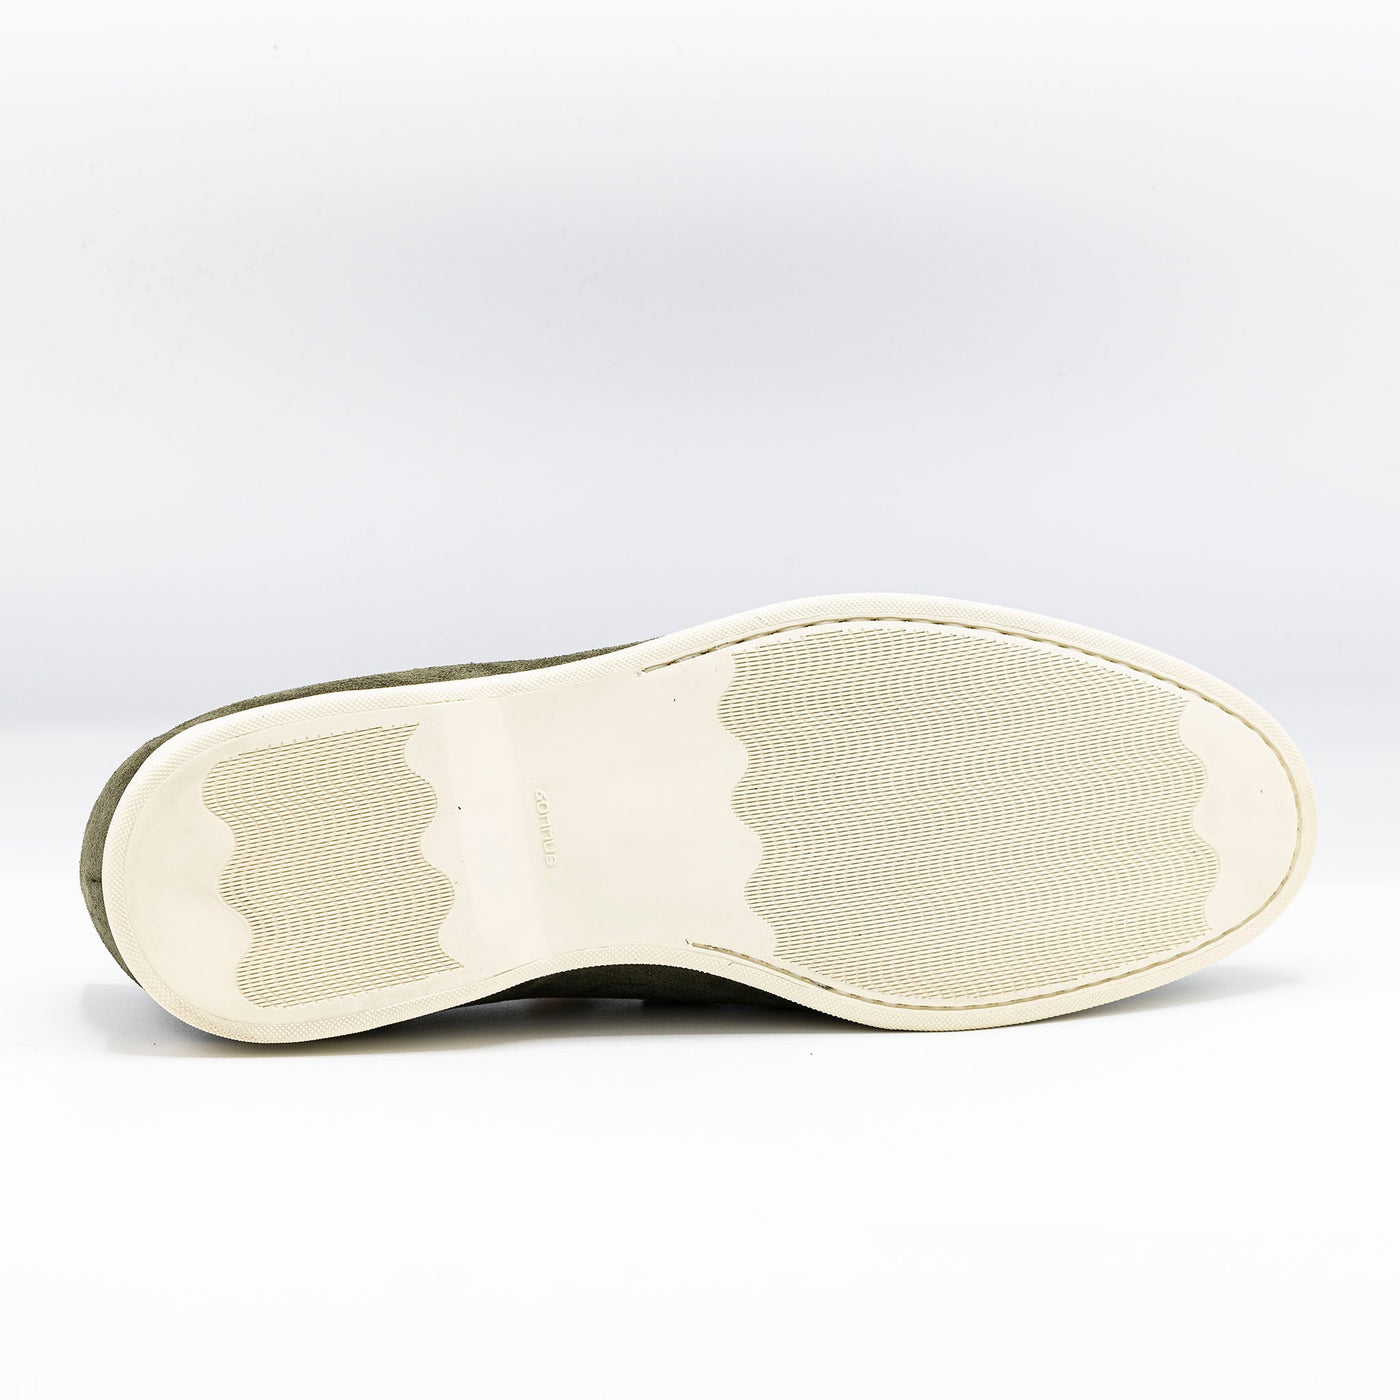 The minimal moccasins SOLE